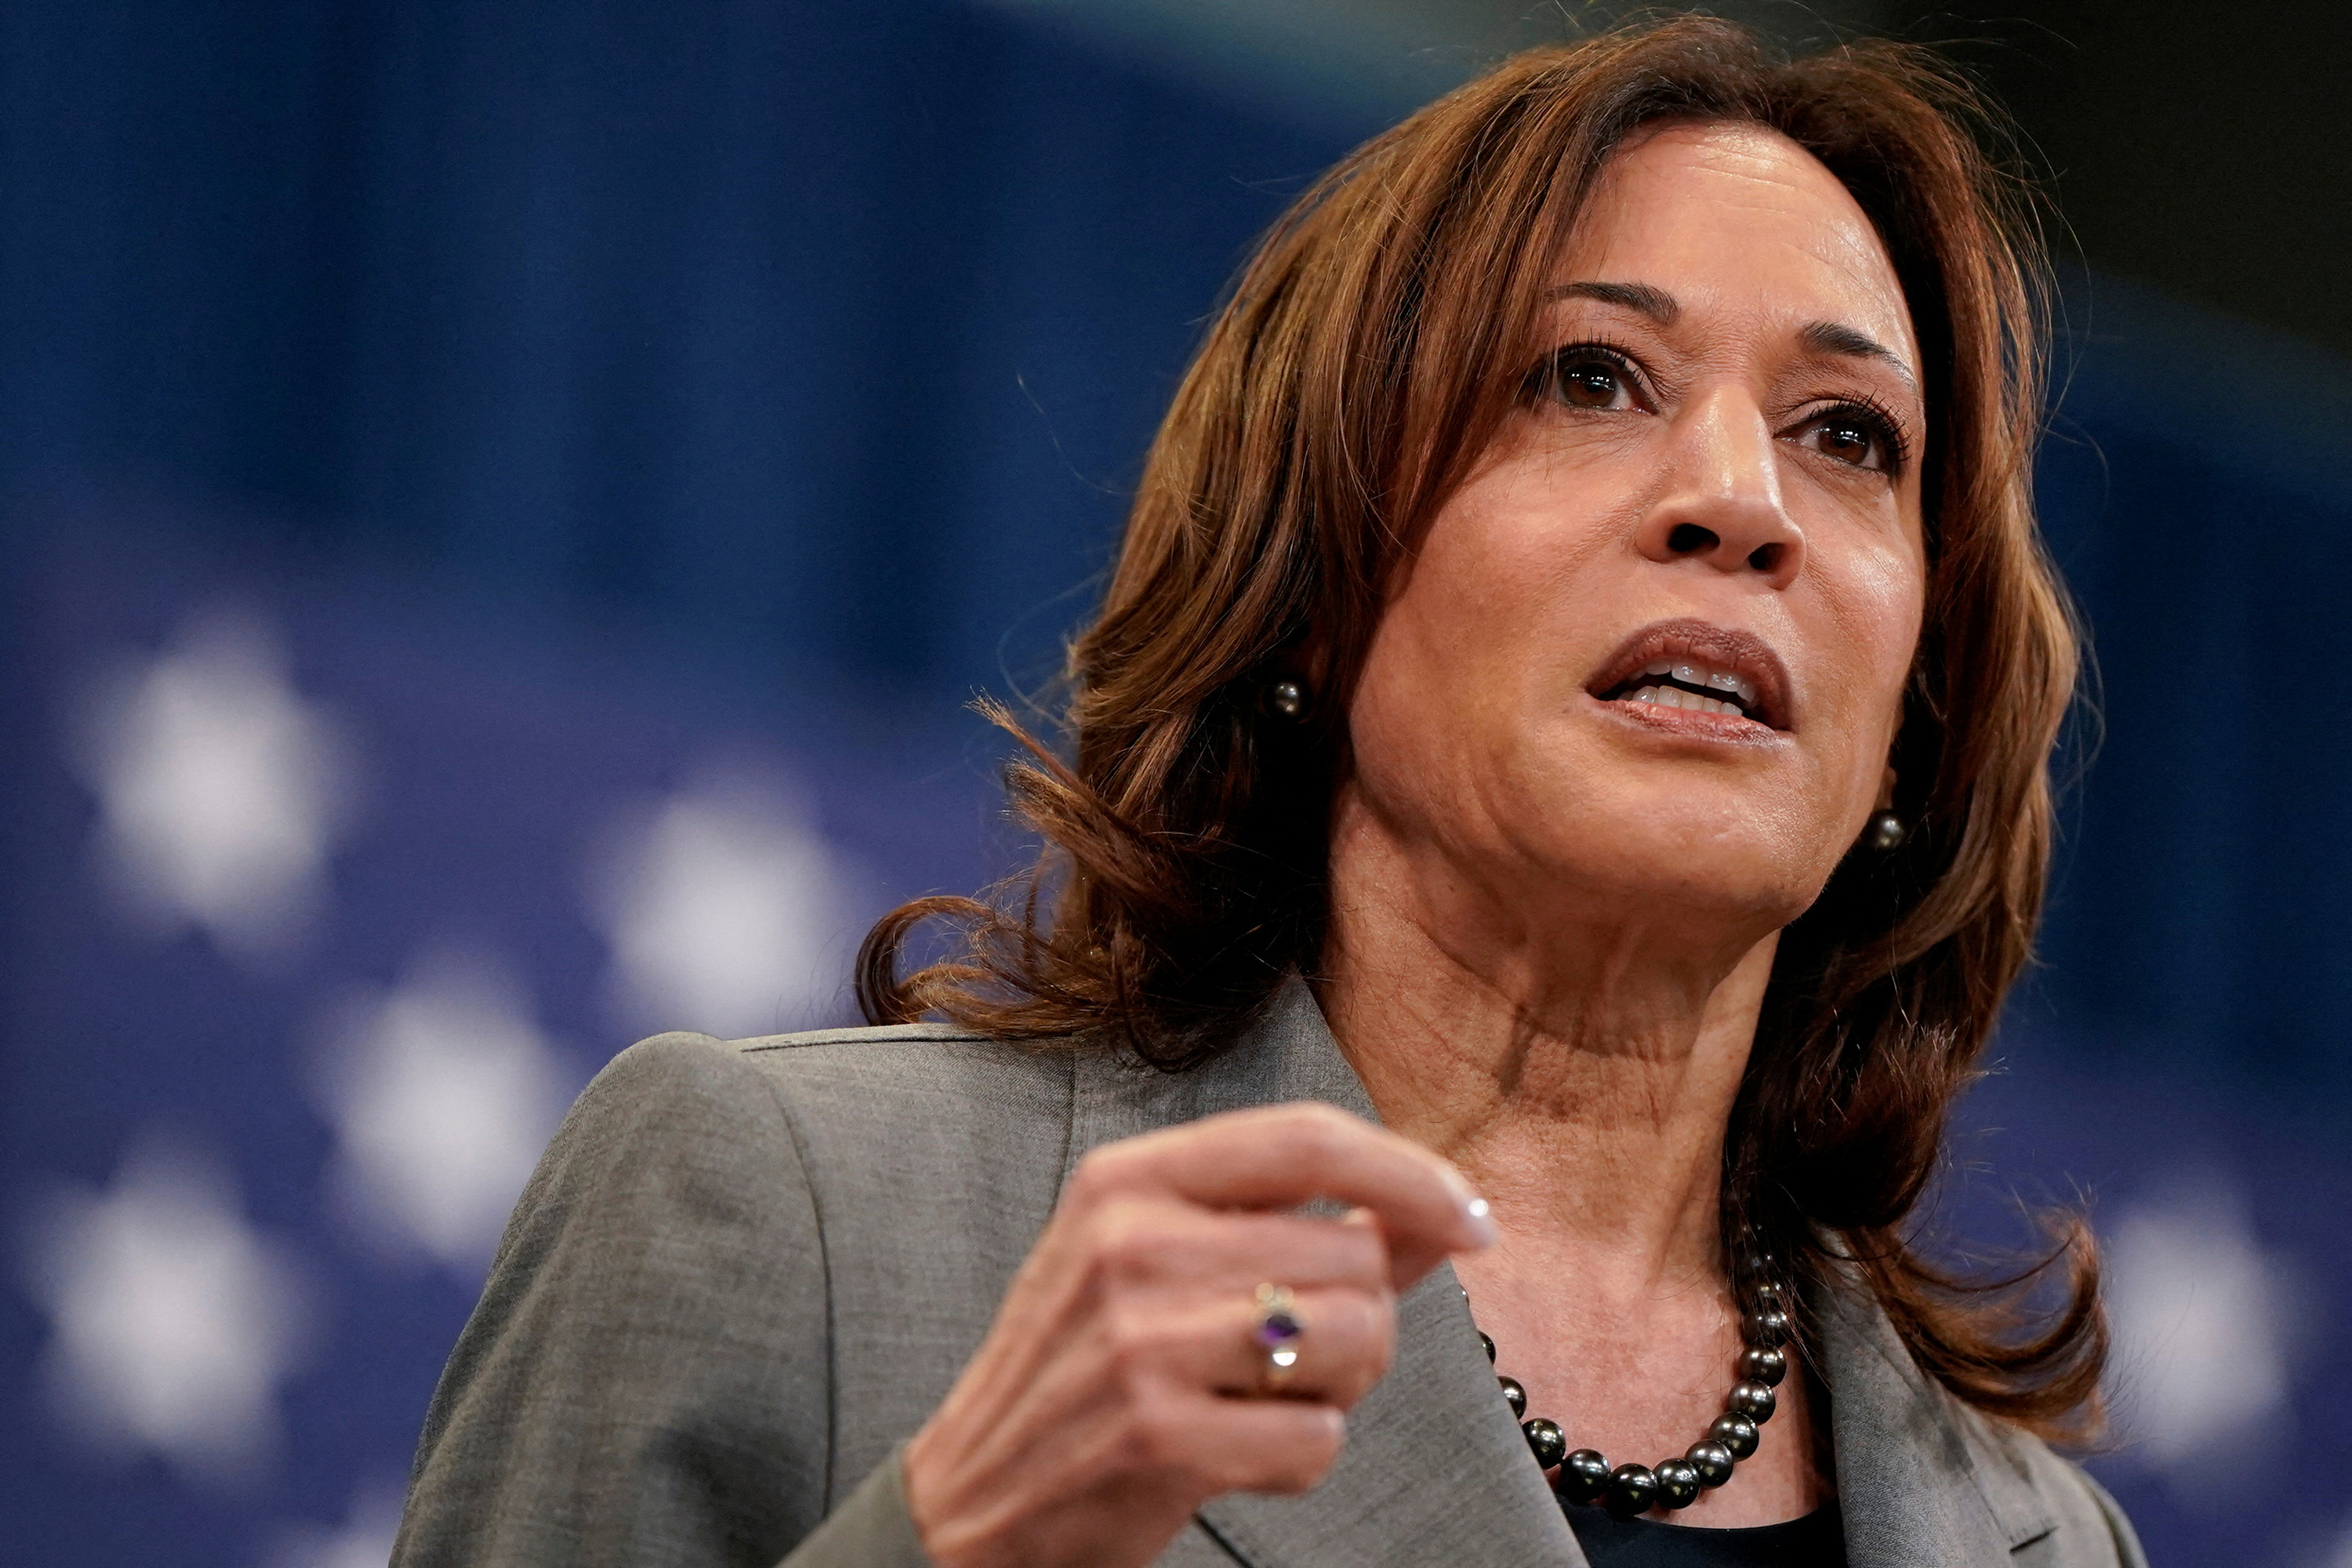 US Vice President Kamala Harris delivers remarks in Raleigh, North Carolina, on March 26.